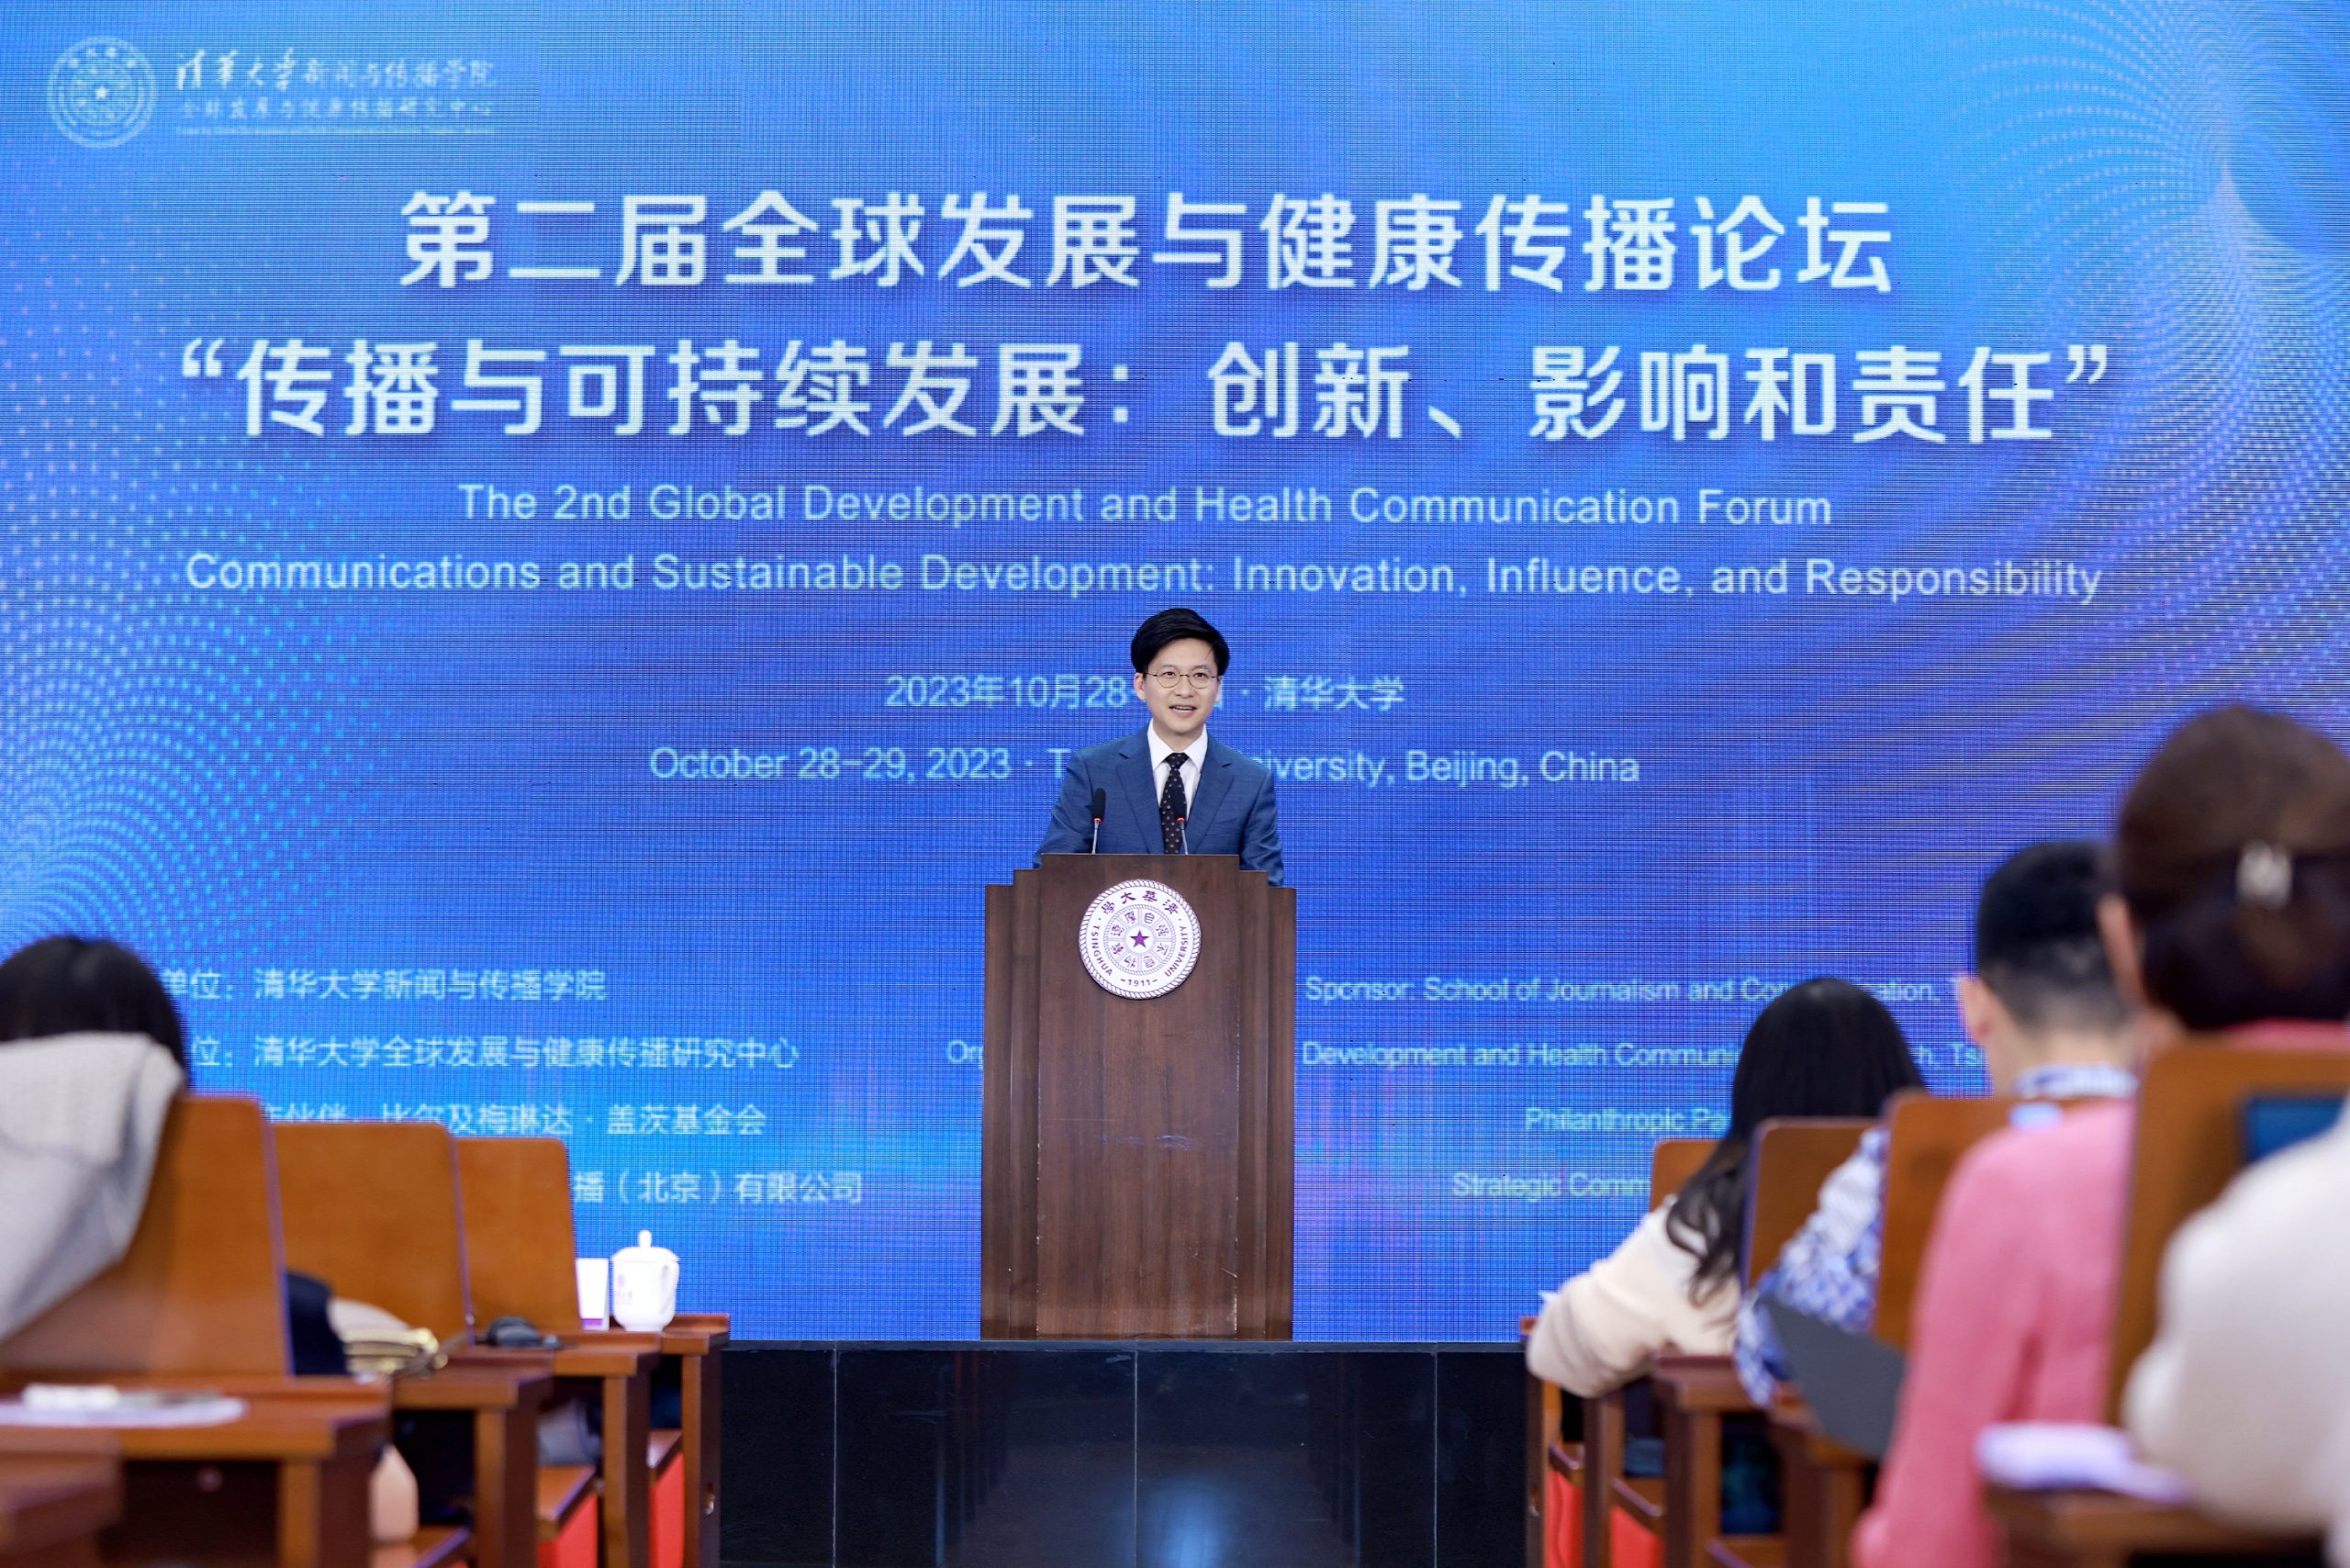 Organizing a Forum to Promote Global Development and Health Communication